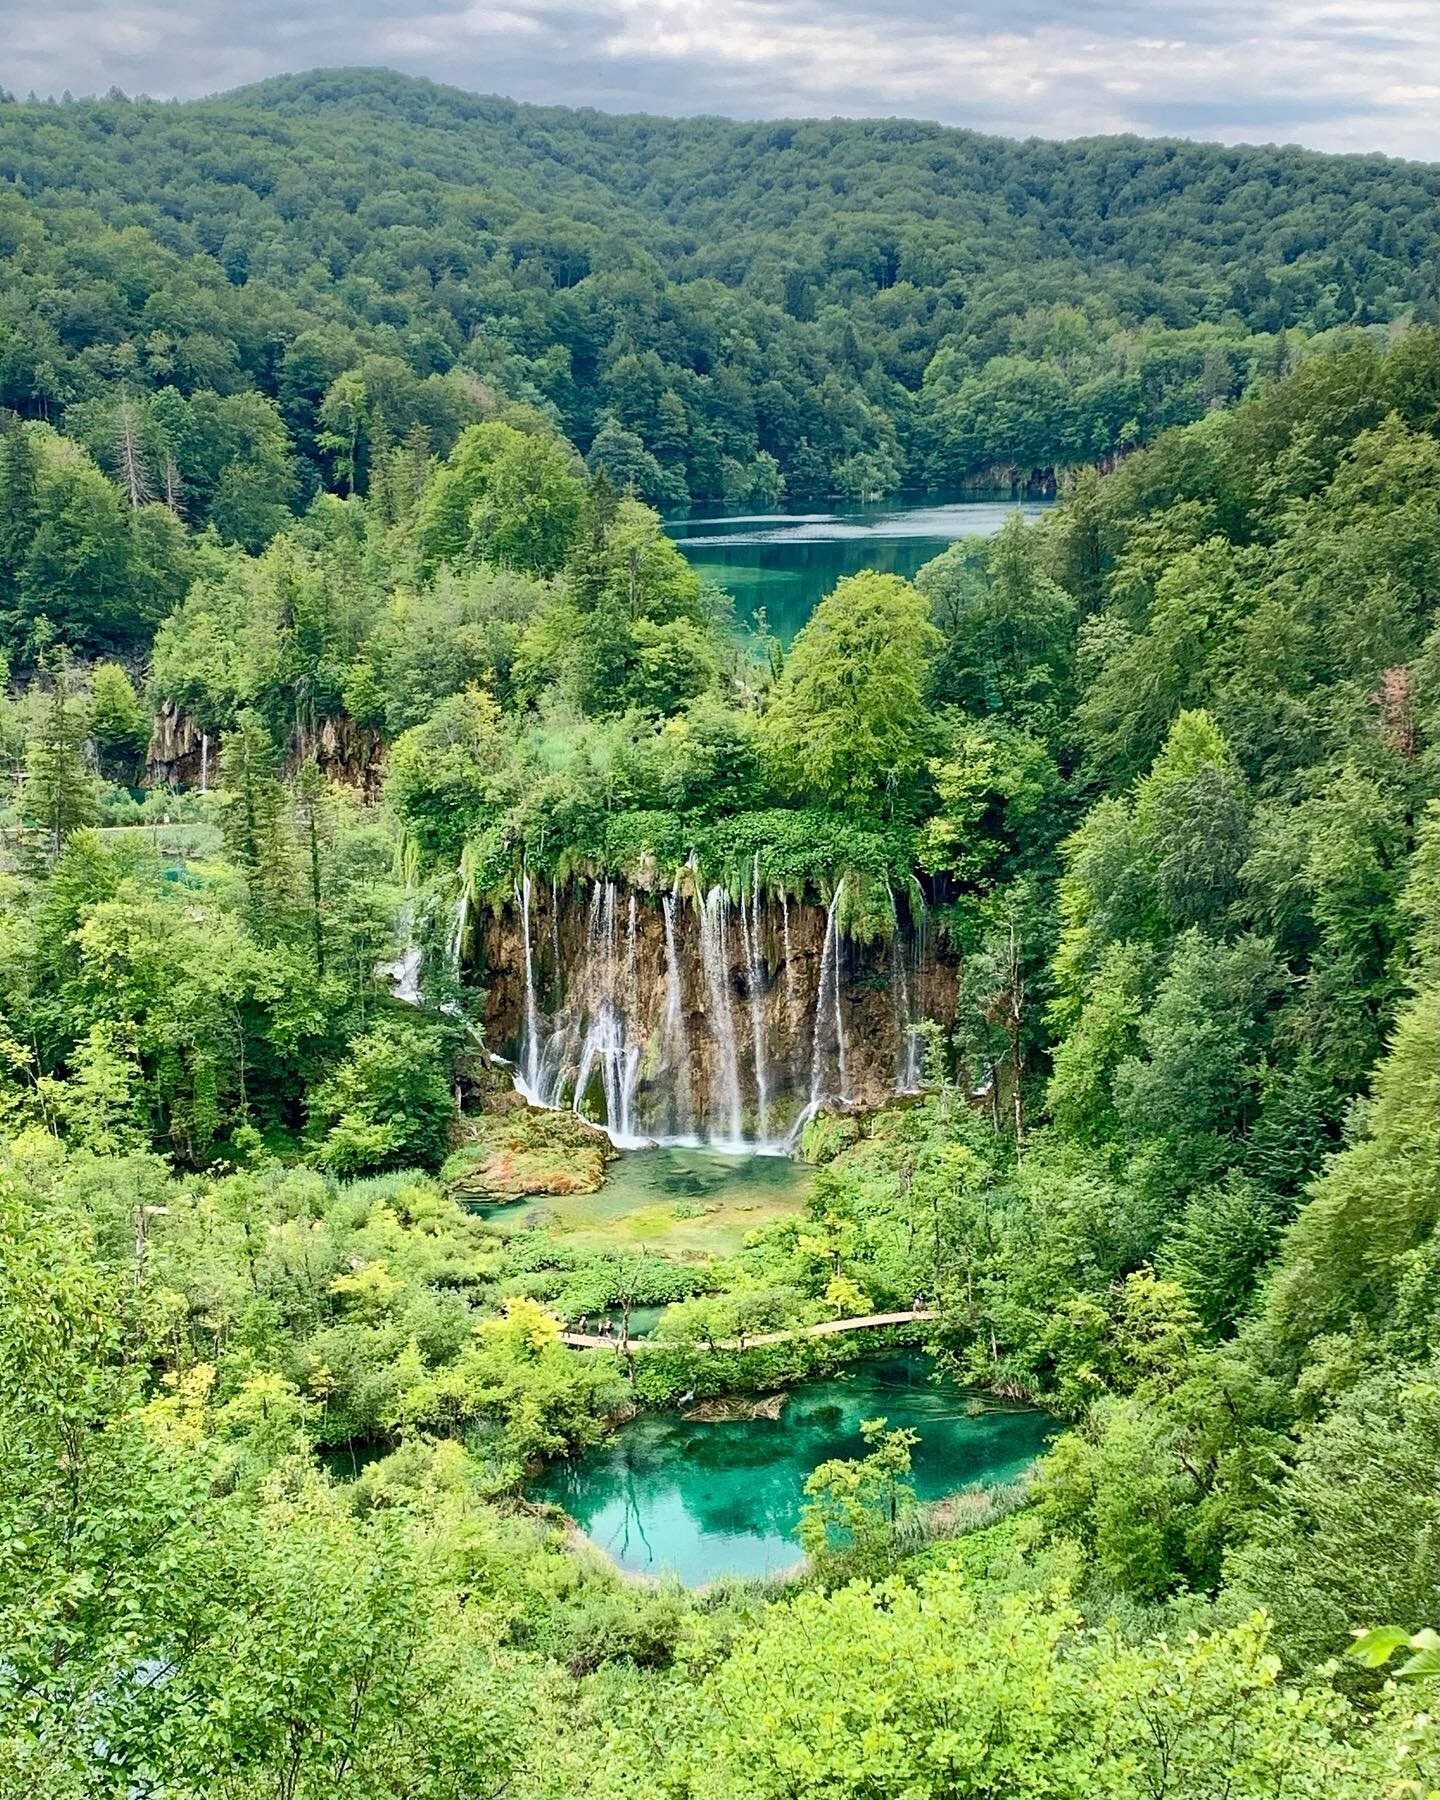 Favorite Euro falls outside Iceland &amp; Norway&thinsp;
&thinsp;
Plitvice Park has 16 tiered lakes connected by waterfalls, with trails cutting through and above. Hike to the highest points around the Upper Lakes for vistas of the levels.&thinsp;
&t